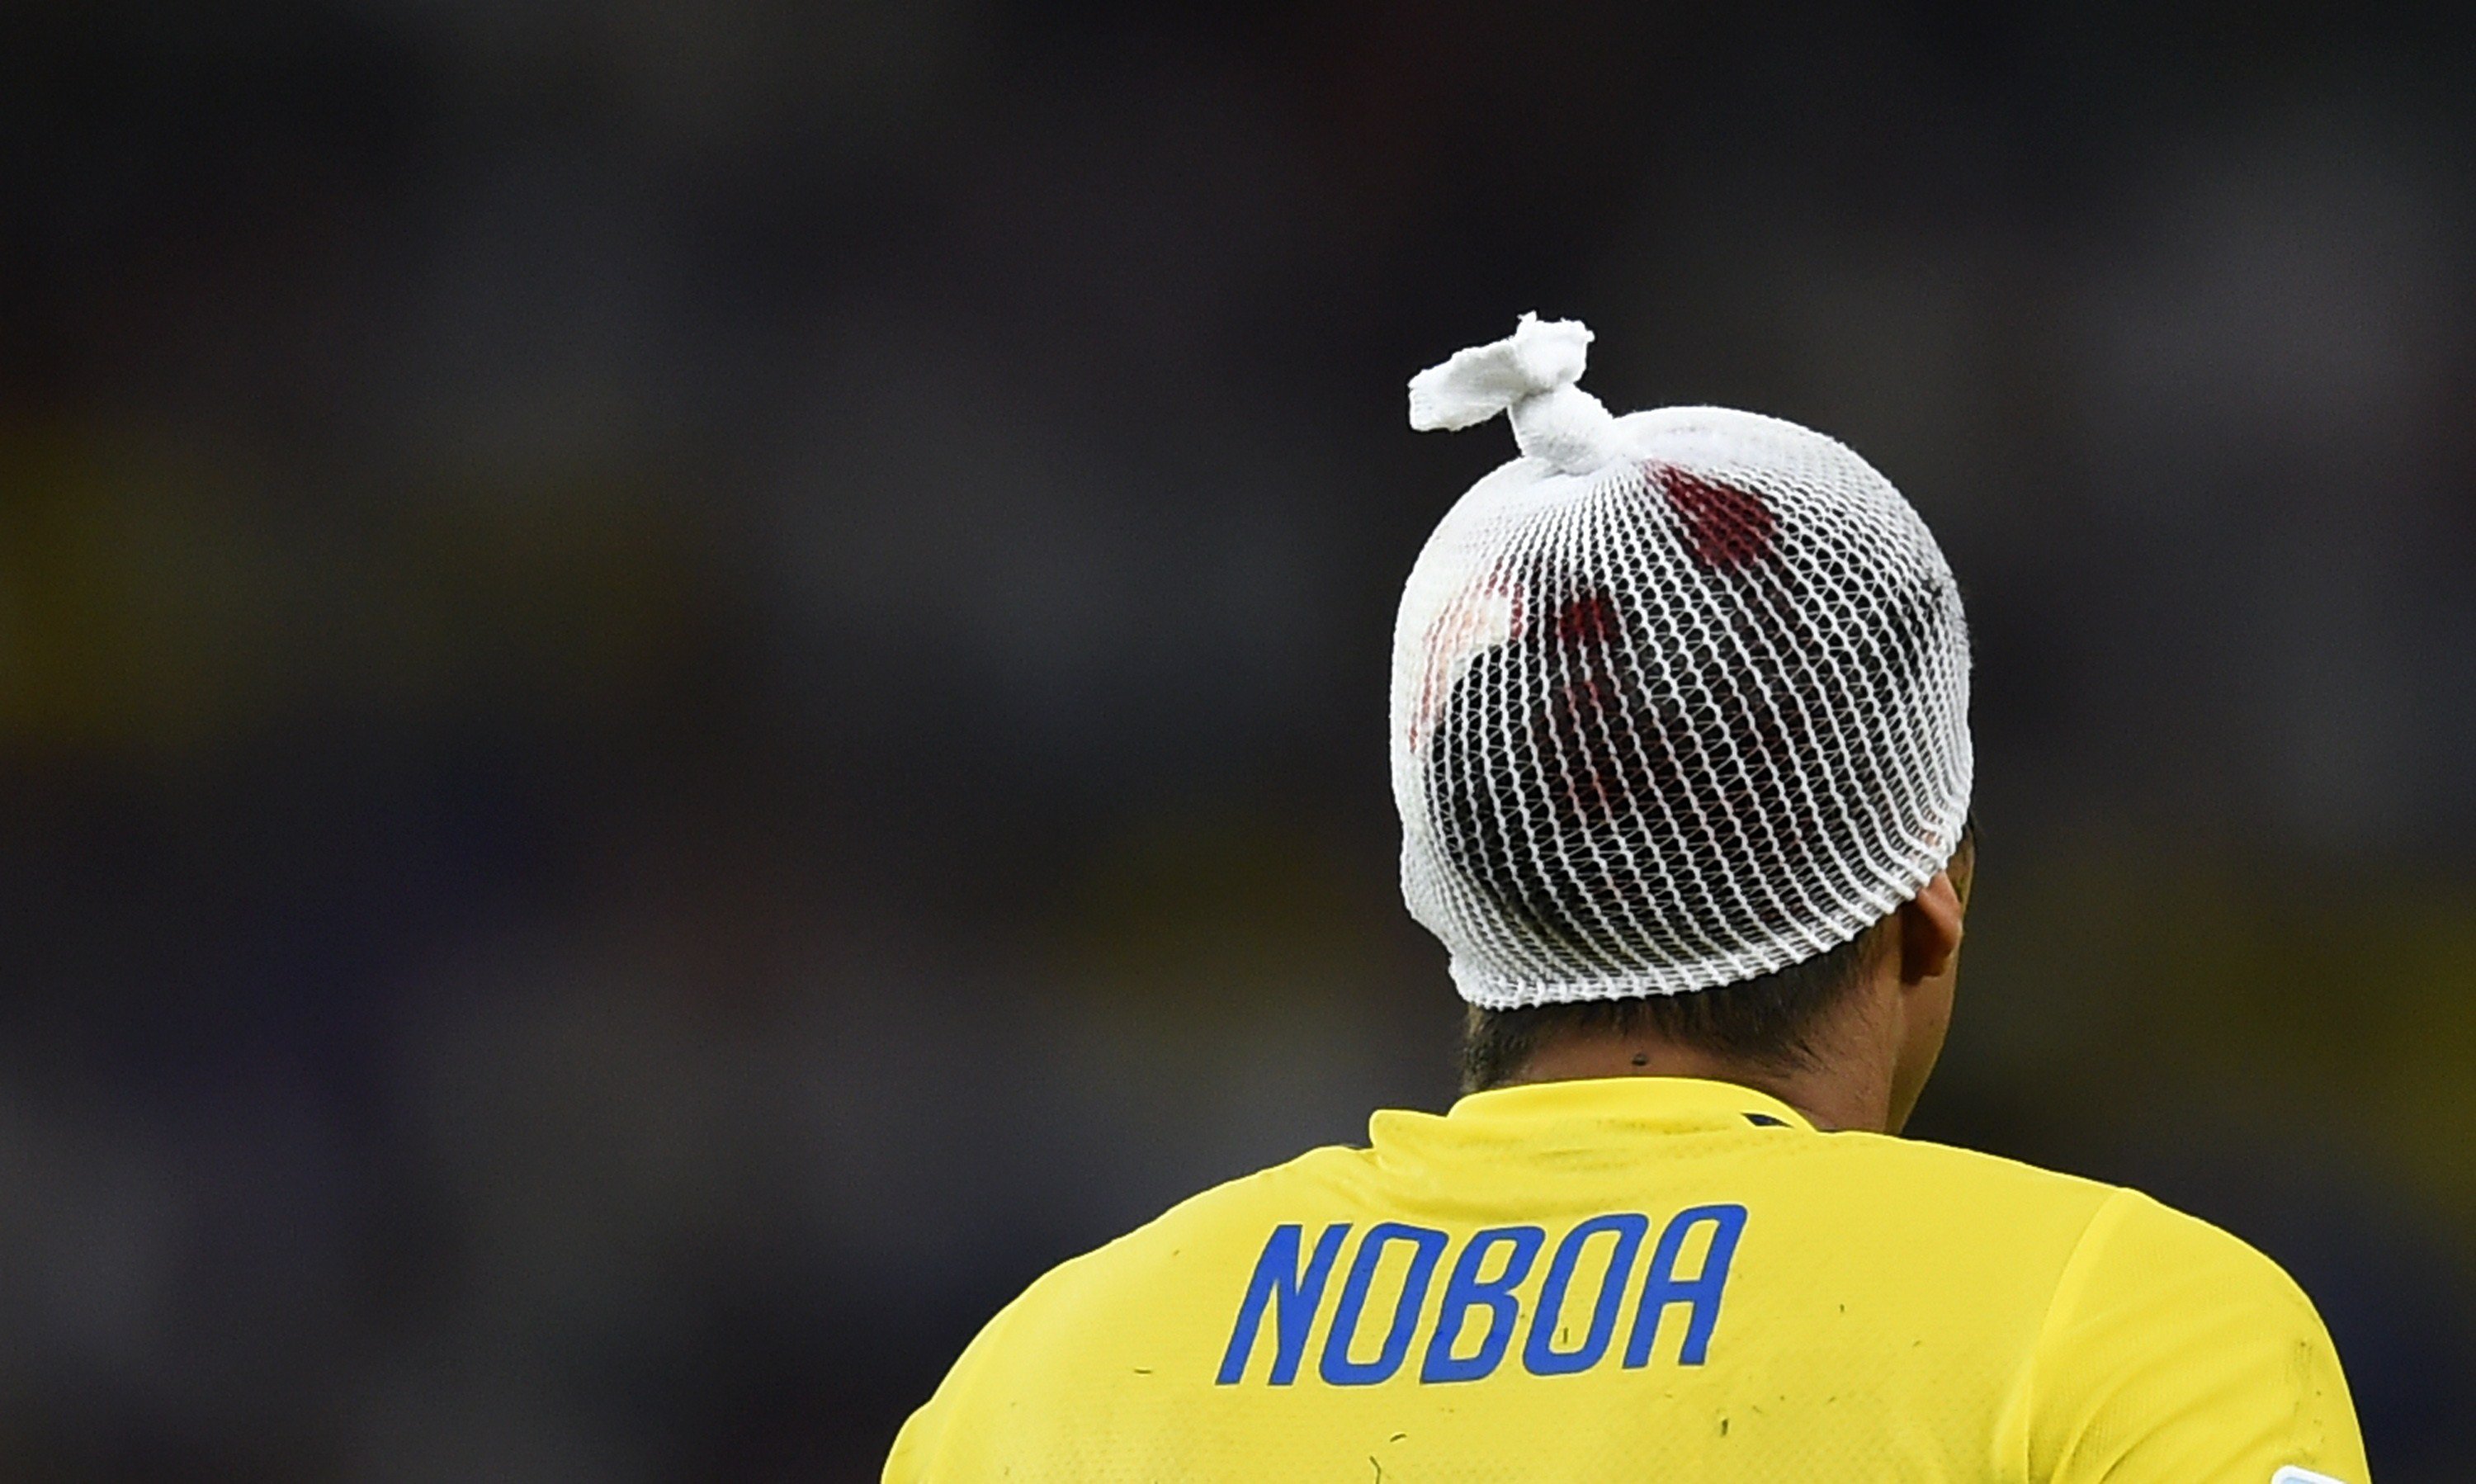 Ecuador's midfielder Christian Noboa wears a bandage after clashing his head during the match between Ecuador and France at the Maracana Stadium in Rio de Janeiro on June 25, 2014.